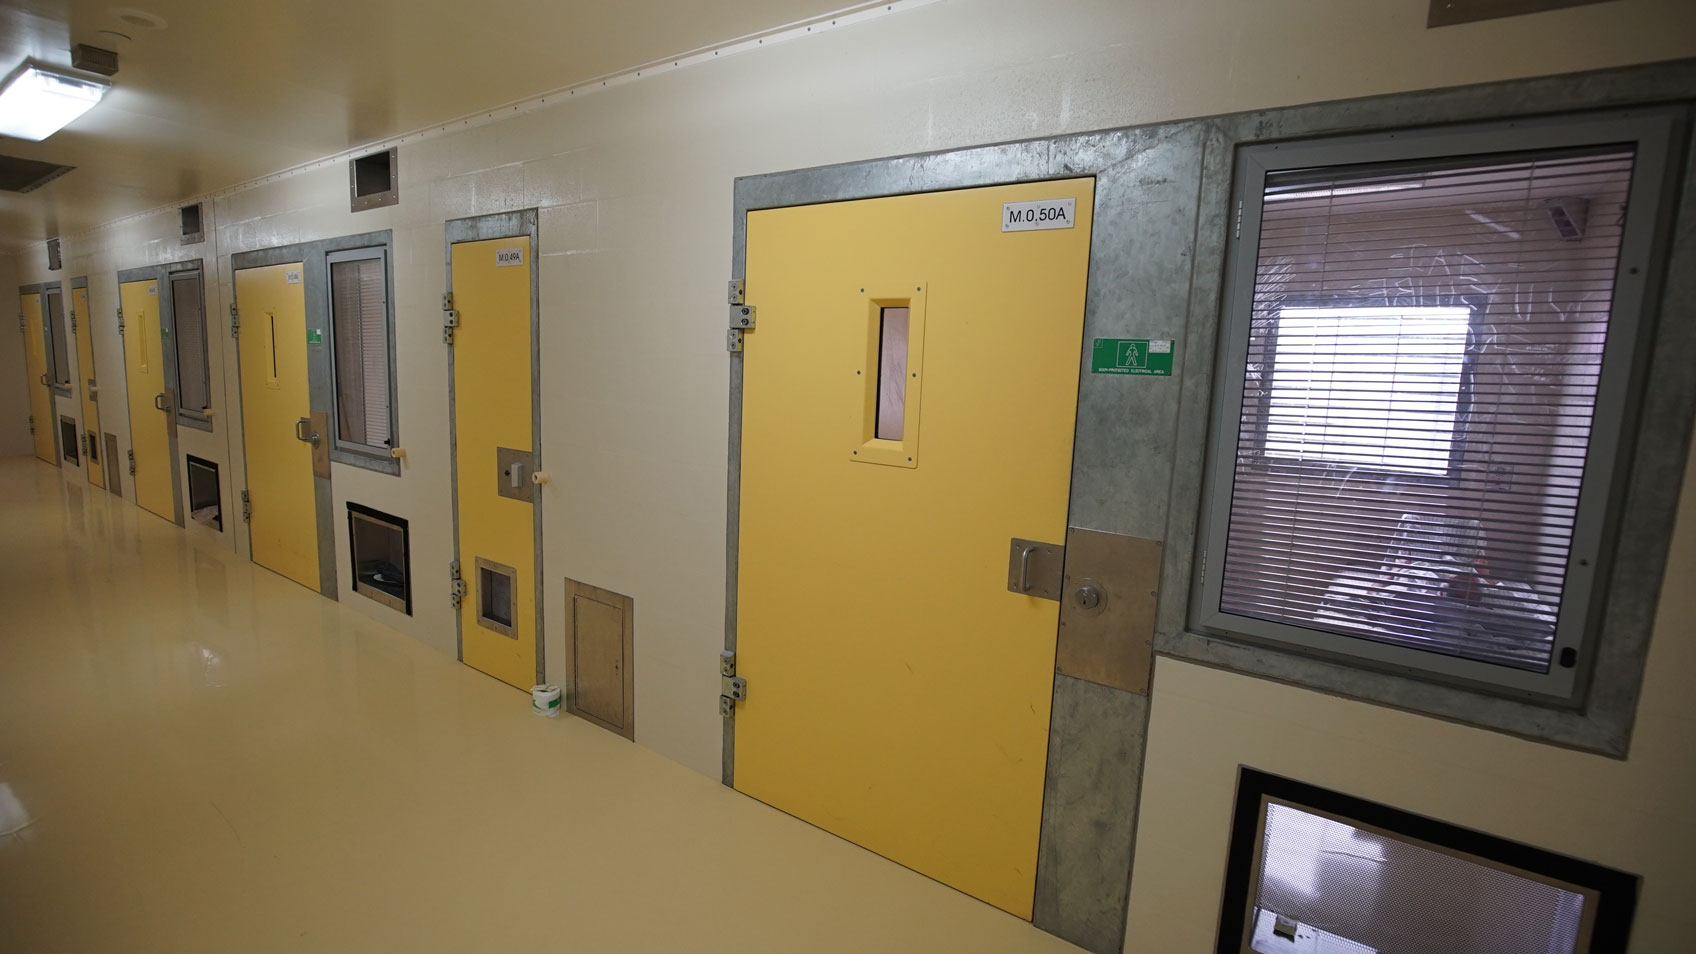 This is an image of a prisoner in his solitary confinement cell in the safety unit at Lotus Glen Correctional Centre, northern Queensland.